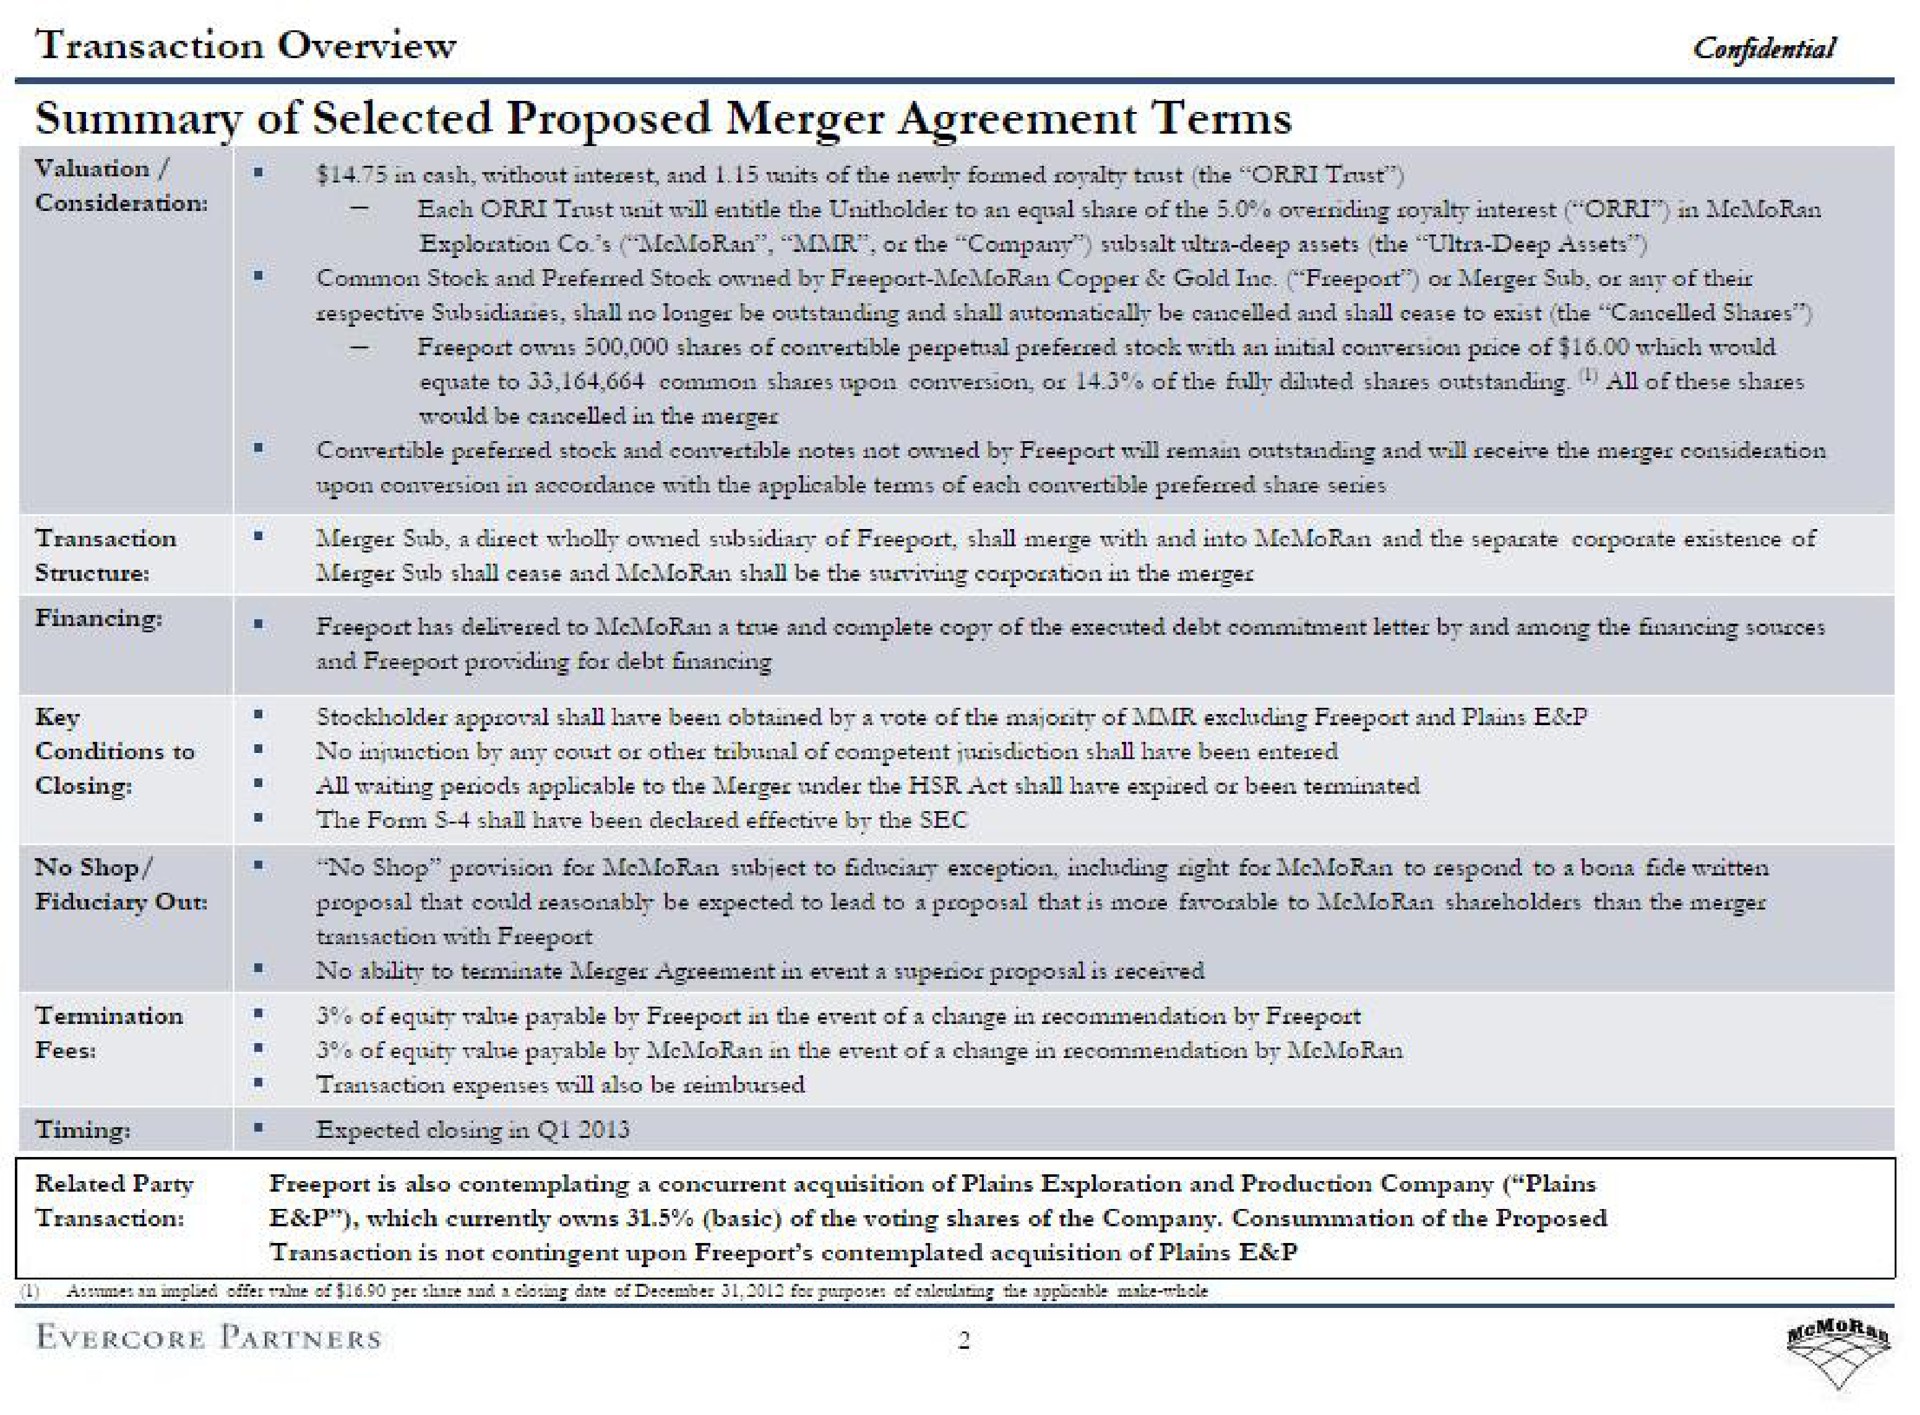 transaction overview confidential summary of selected proposed merger agreement terms | Evercore